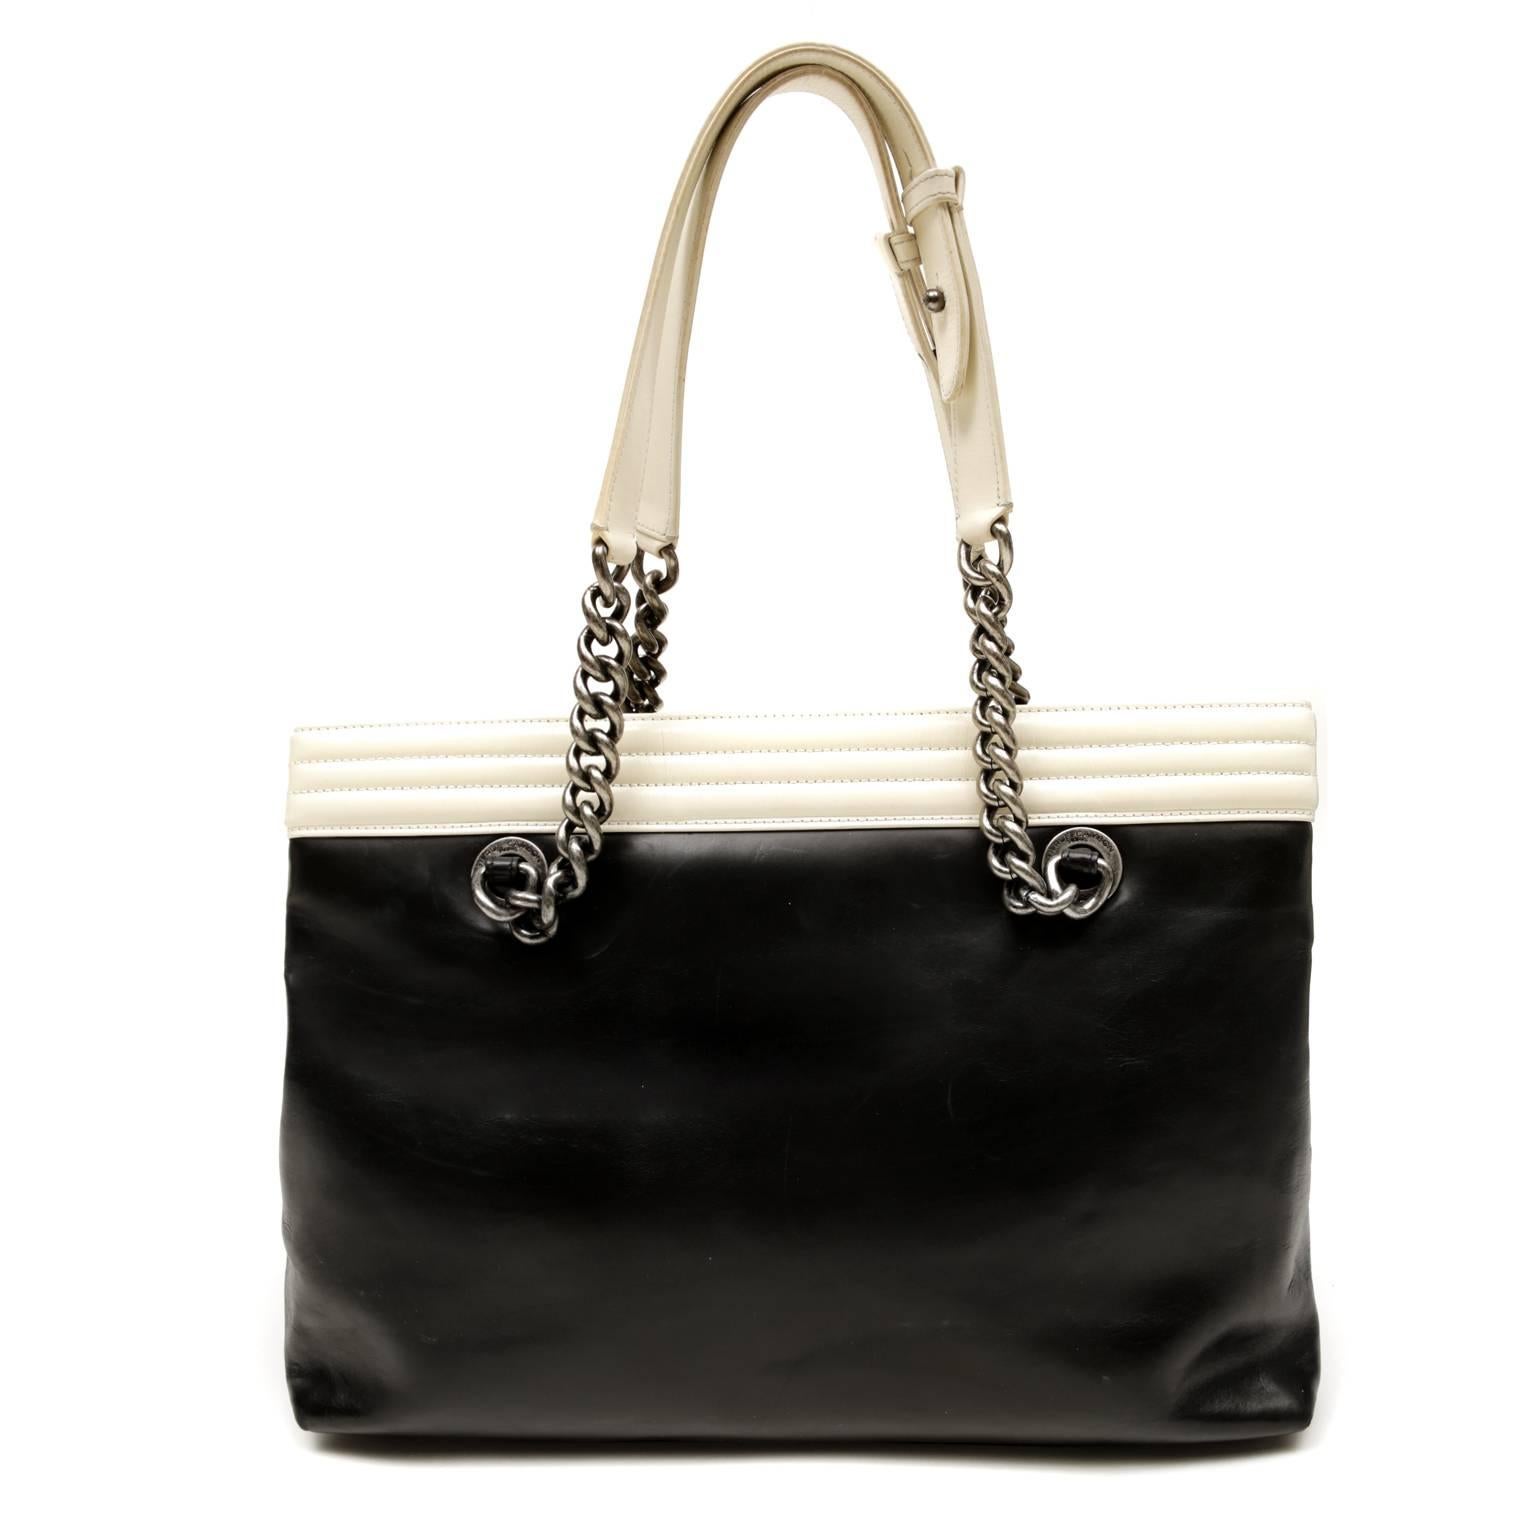 Chanel Black and Cream Leather Boy Bag Shopper- PRISTINE  
The classic silhouette gets an updated look with contrasting trim, edgy ruthenium hardware and the unique Boy bag clasp.

Glossy black leather tote has contrasting cream leather top edge